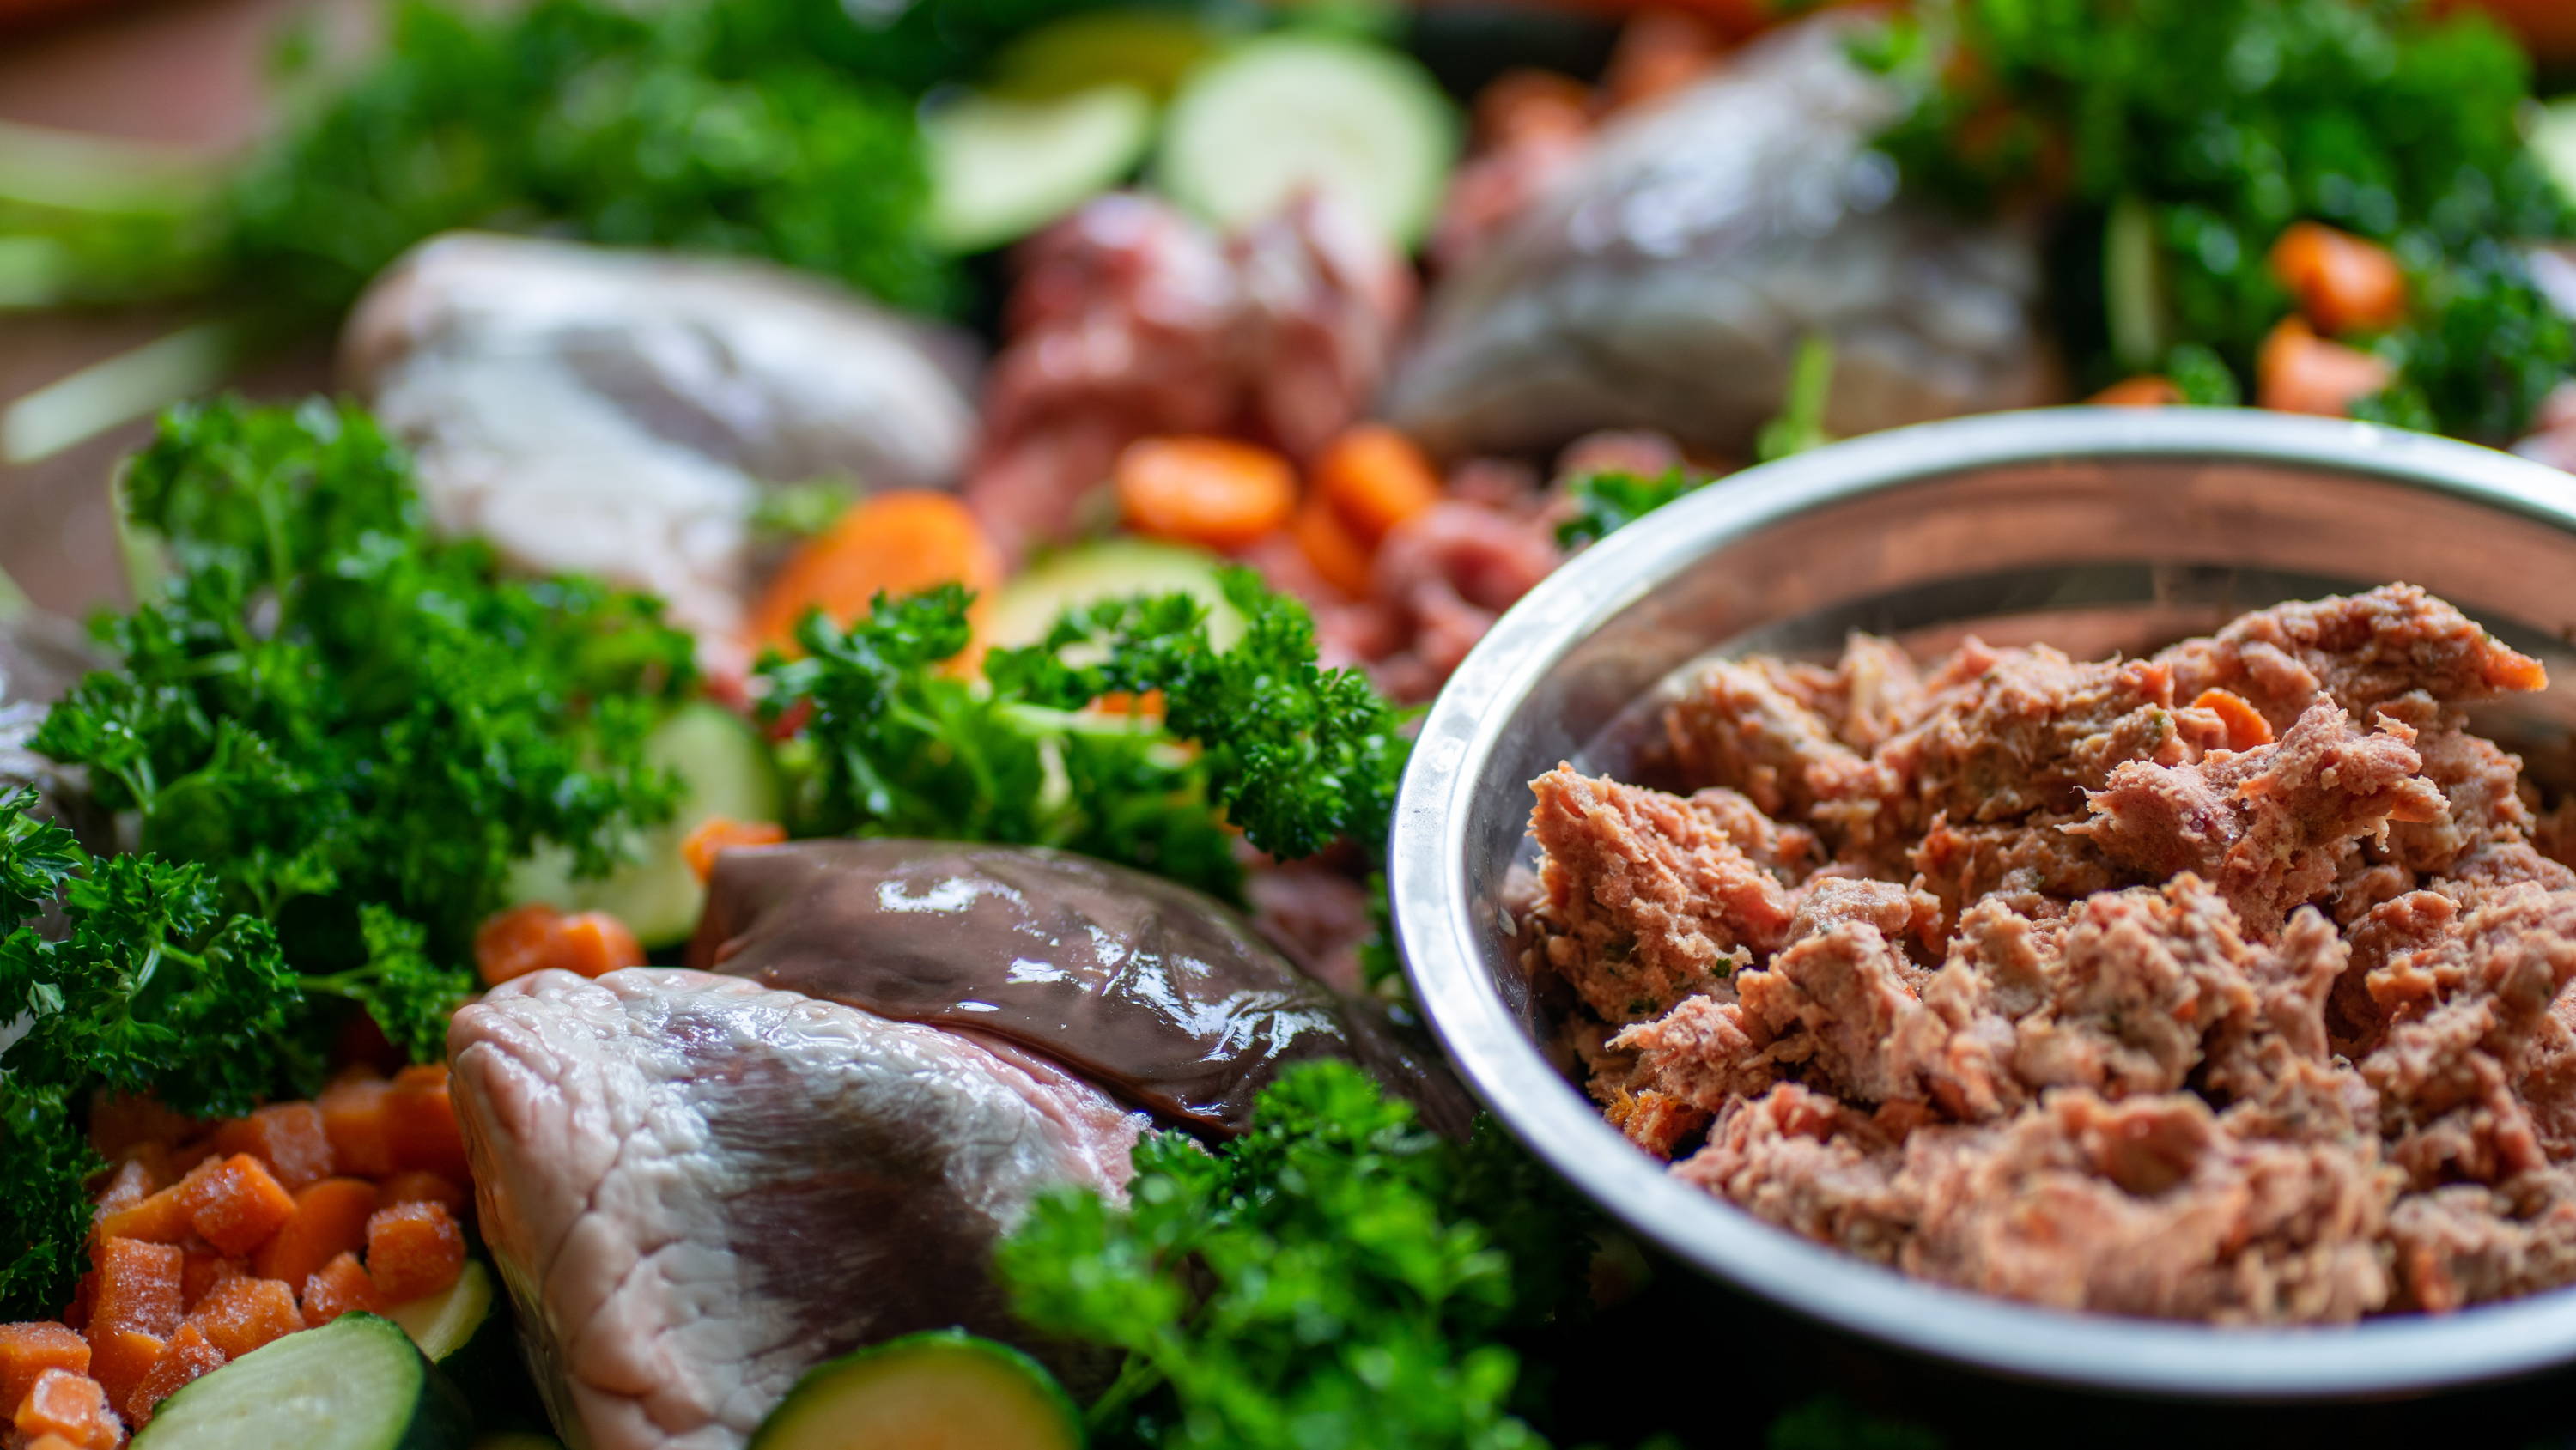 Ground lamb meat in silver bowl on top of raw meat and vegetables.